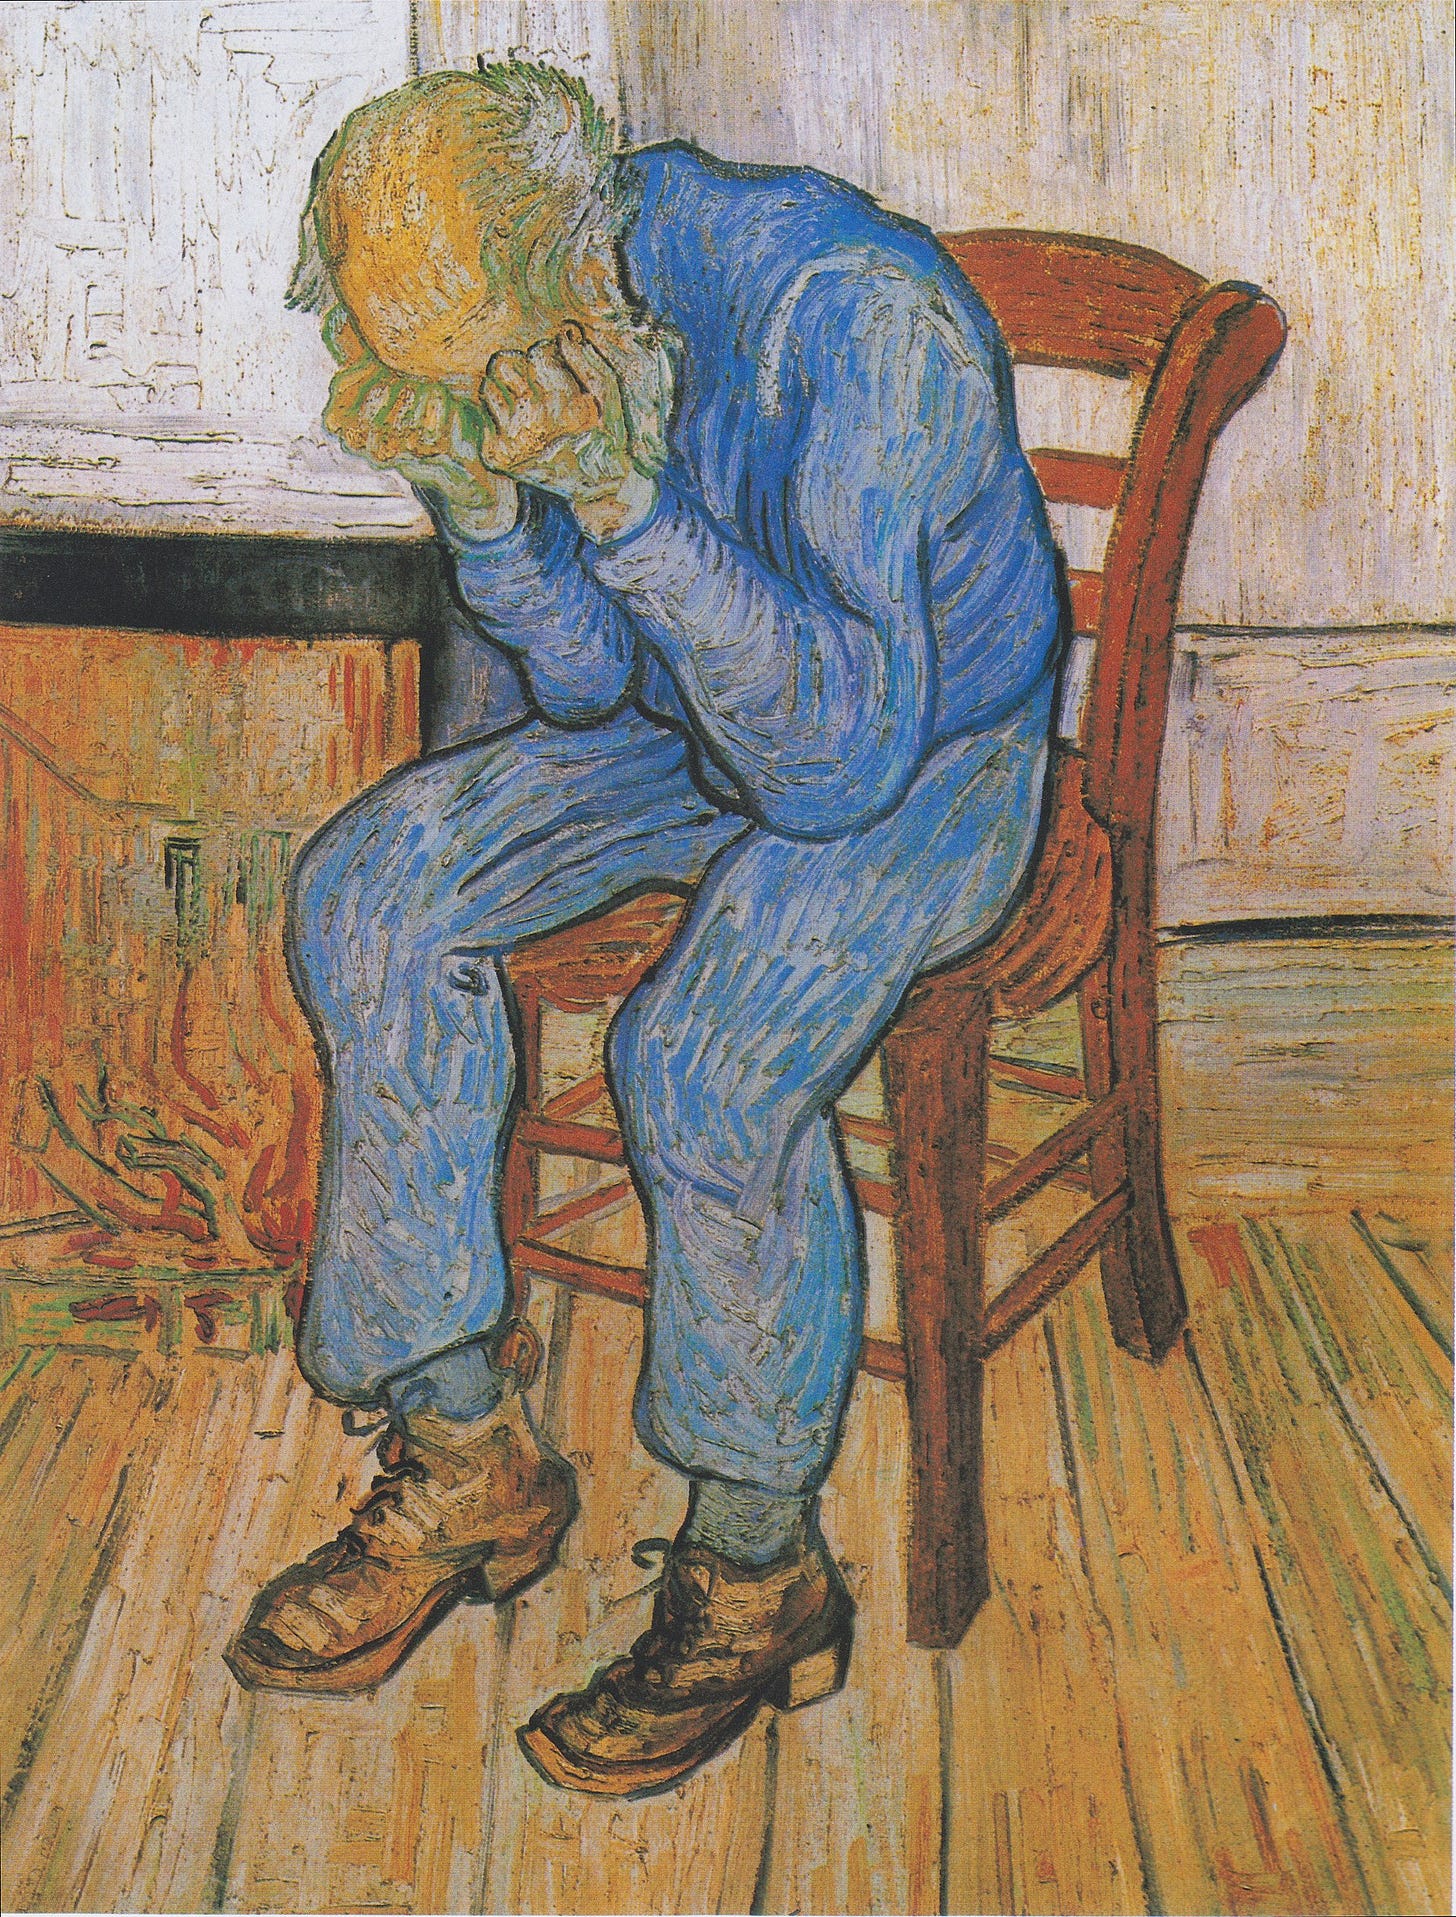 An elderly man with a bald head is sitting on a yellow chair by his fire. There is a low fire in the grate. He is dressed in blue clothes. He is holding his head in his hands.